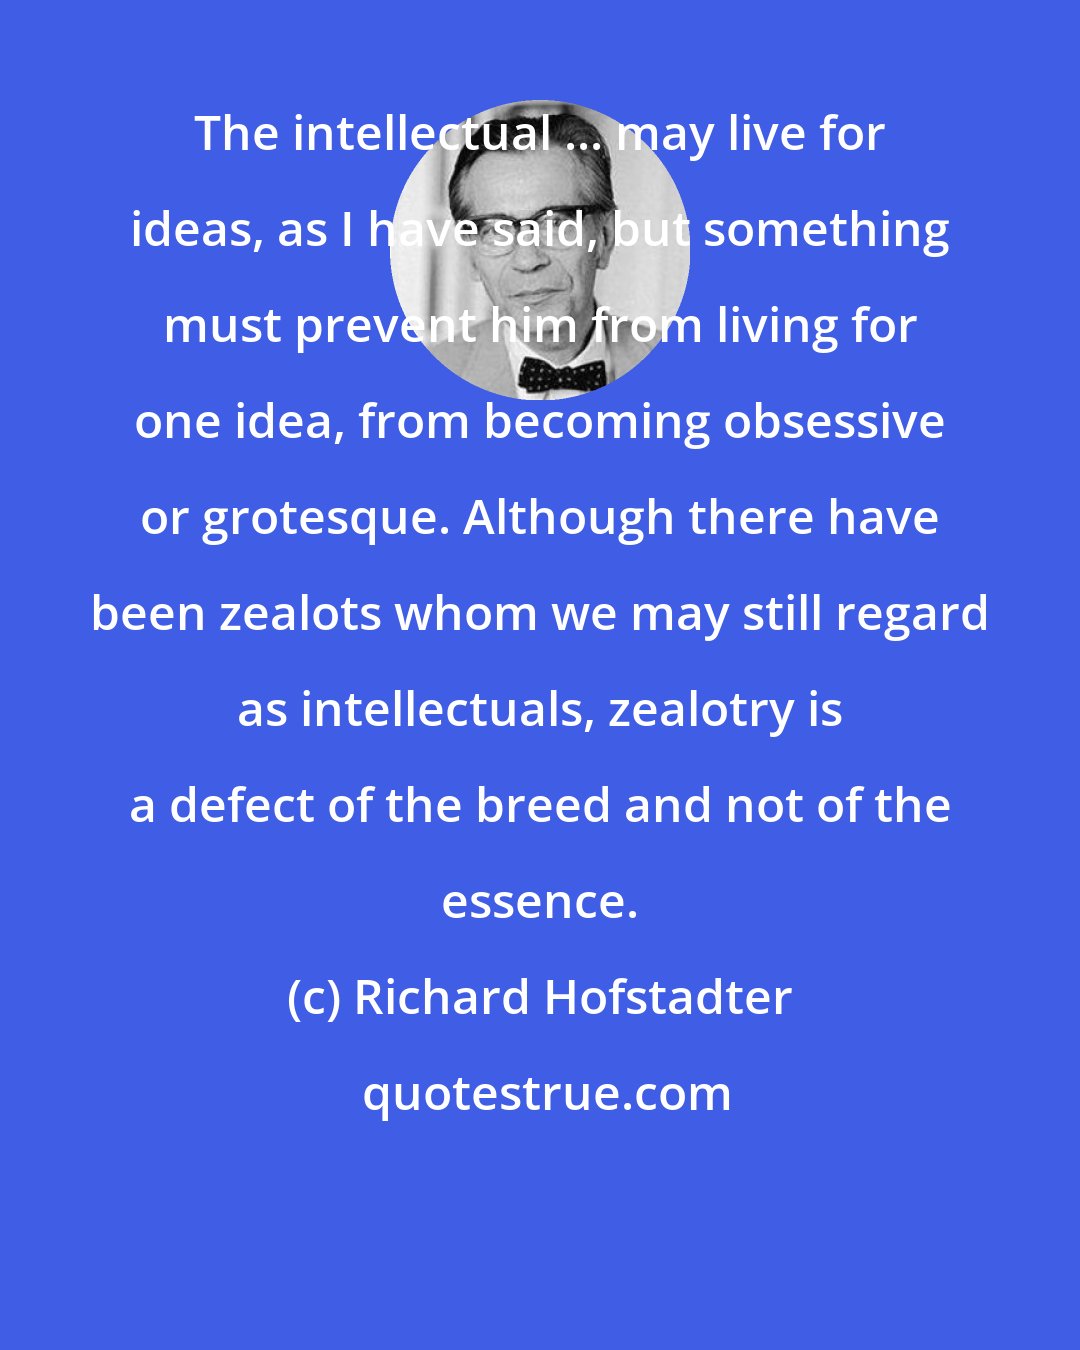 Richard Hofstadter: The intellectual ... may live for ideas, as I have said, but something must prevent him from living for one idea, from becoming obsessive or grotesque. Although there have been zealots whom we may still regard as intellectuals, zealotry is a defect of the breed and not of the essence.